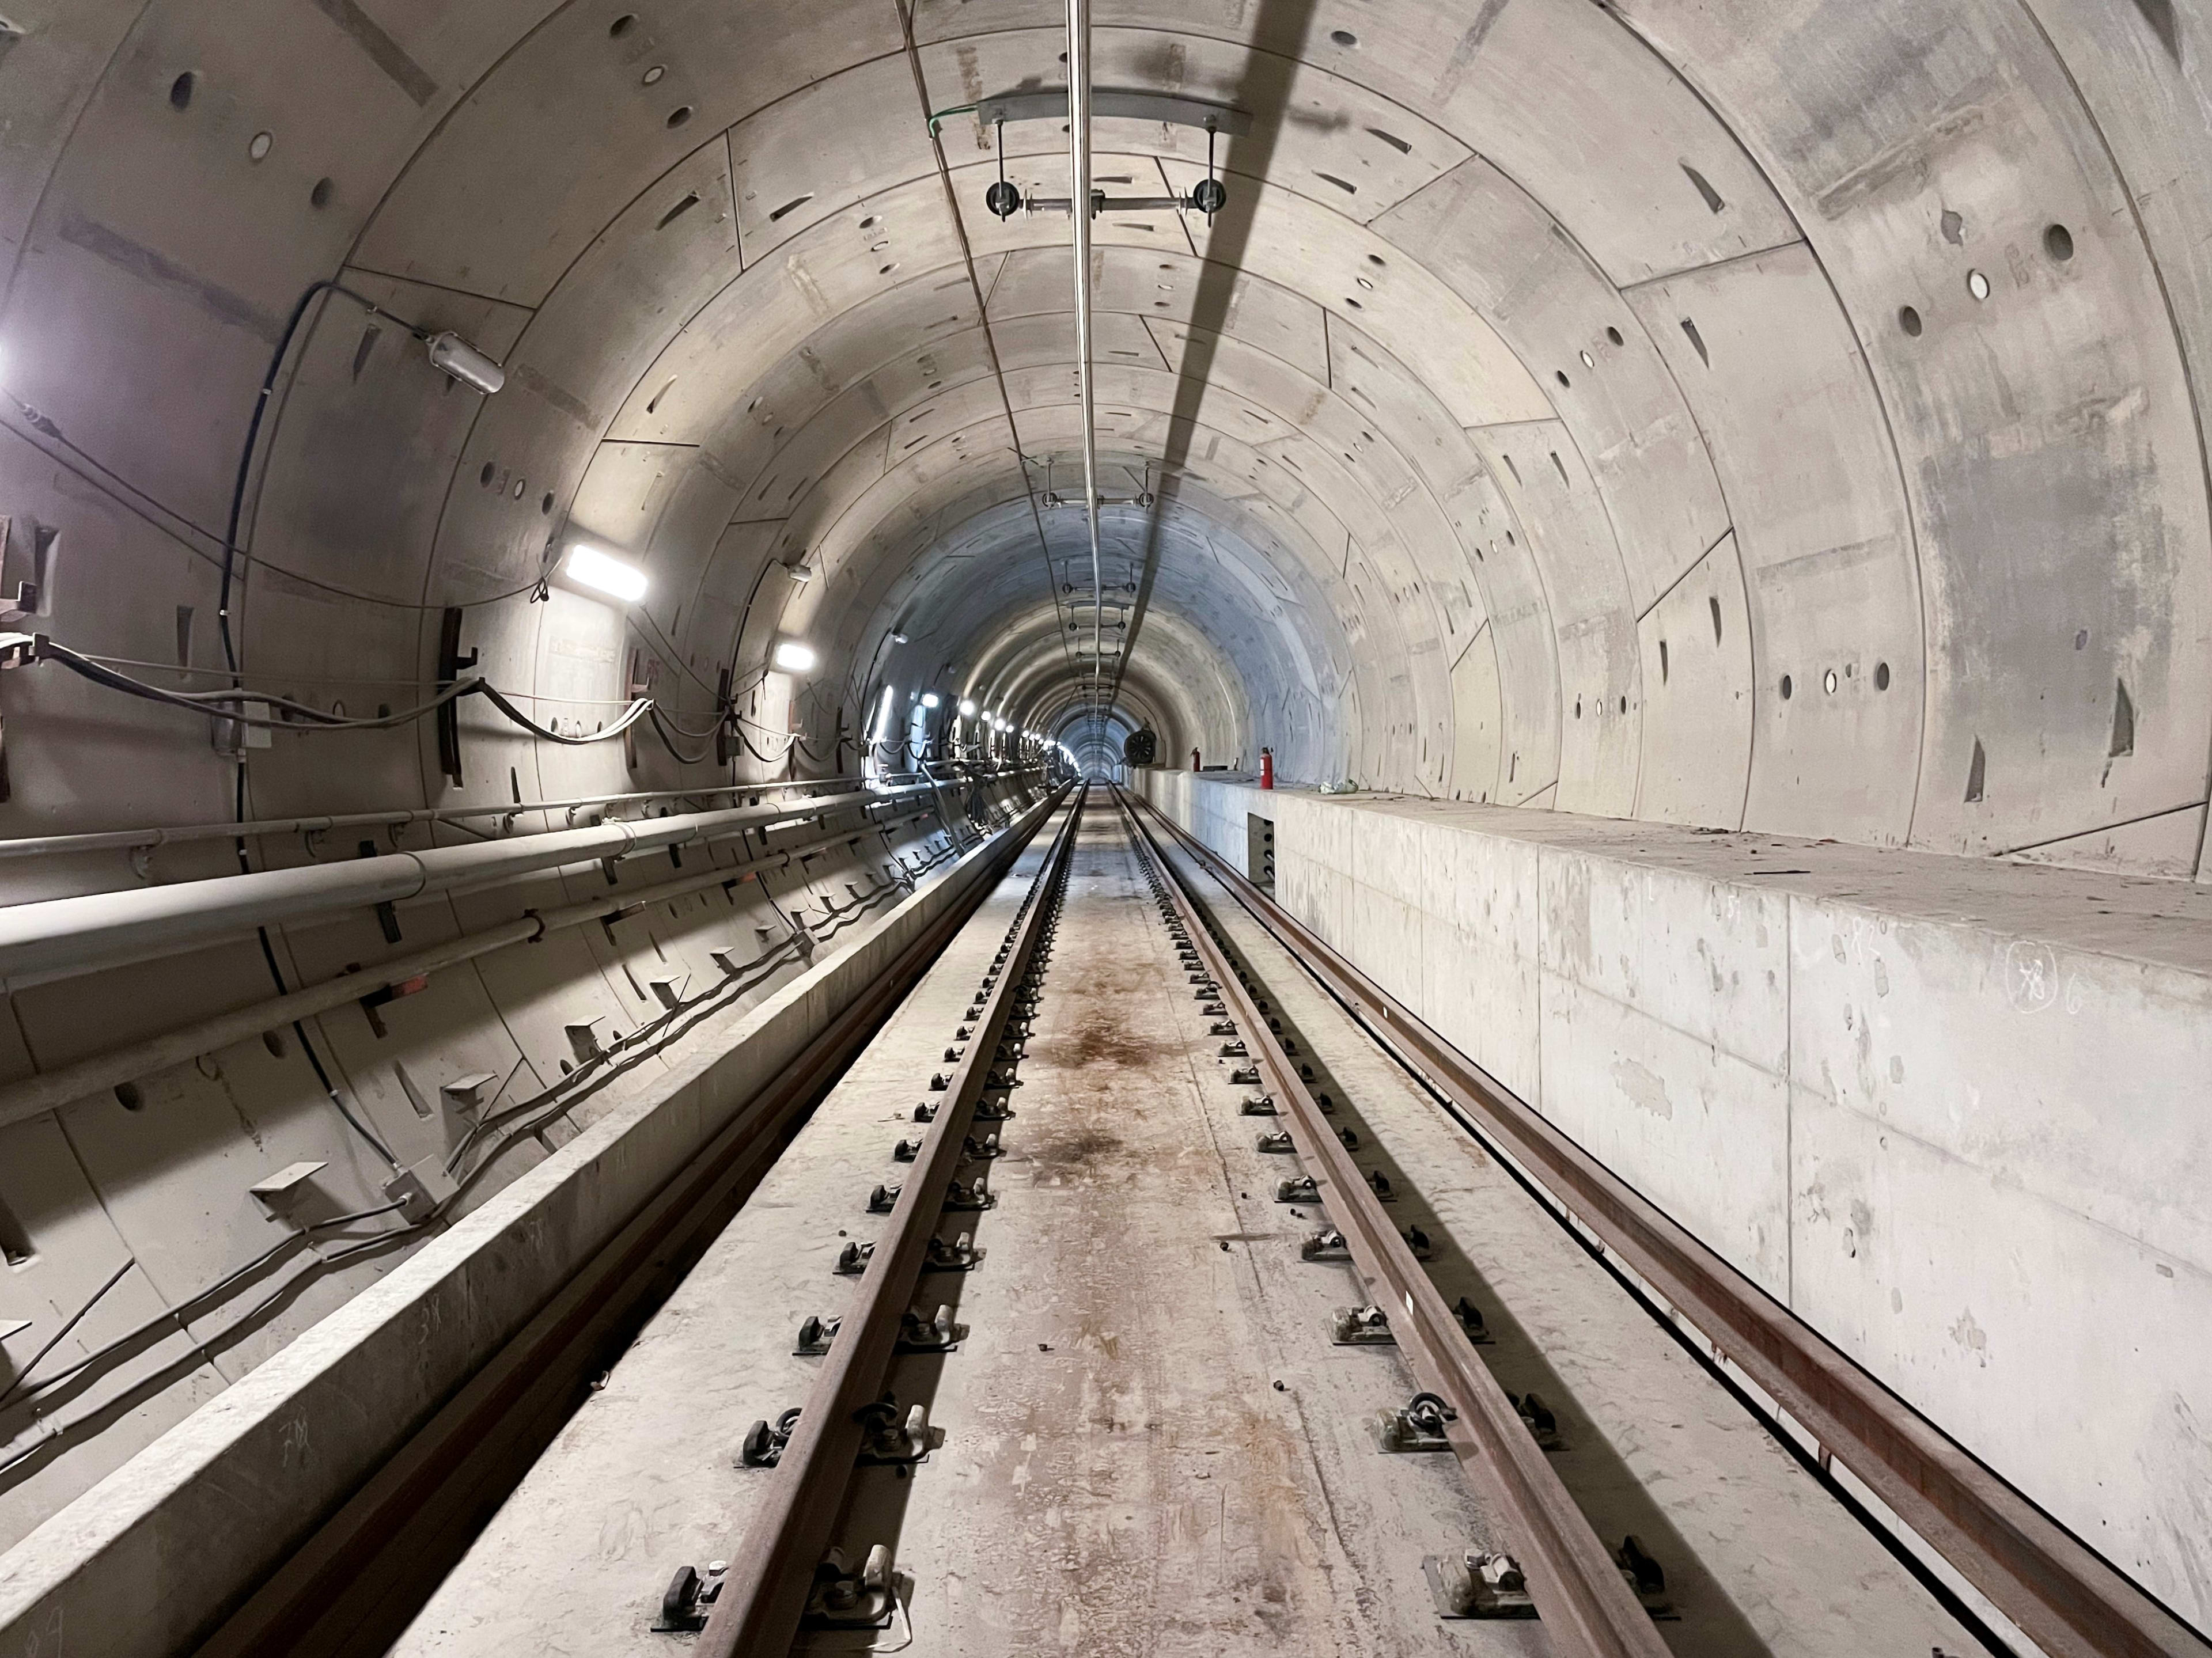 The view down the LRT tunnel between Leaside and Laird station, with tracks installed